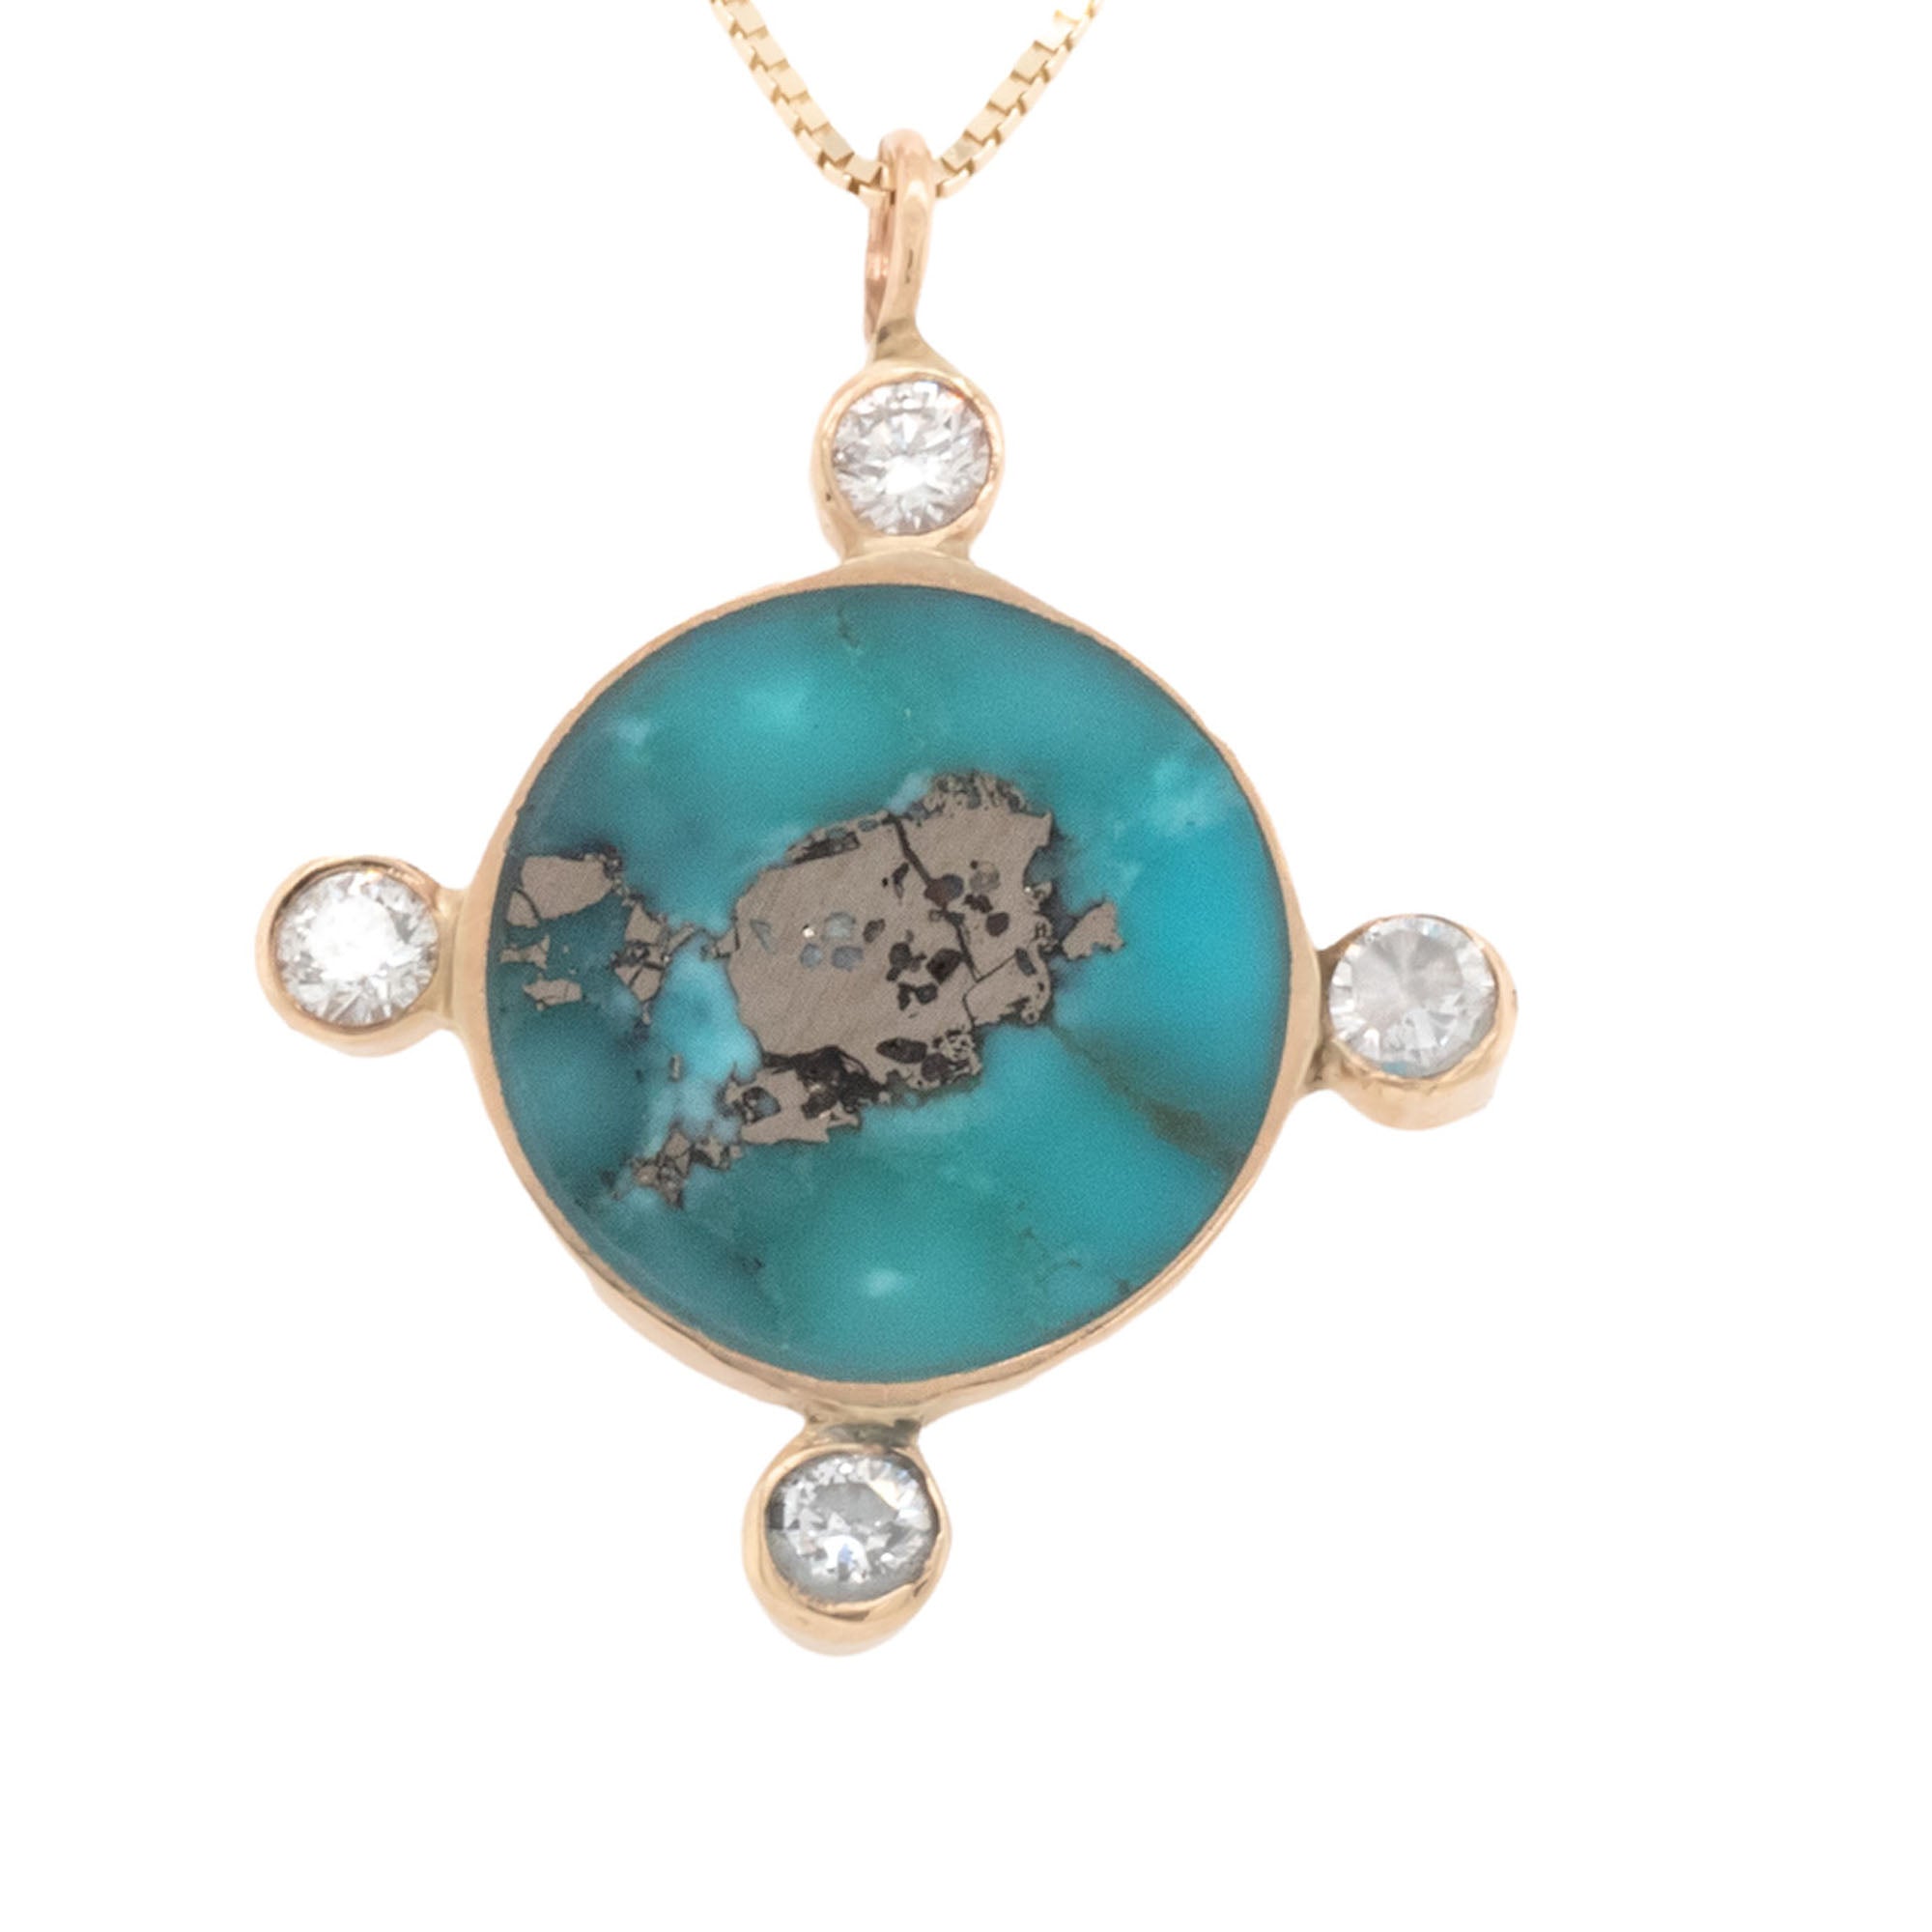 Seconds Morenci Turquoise Compass Necklace